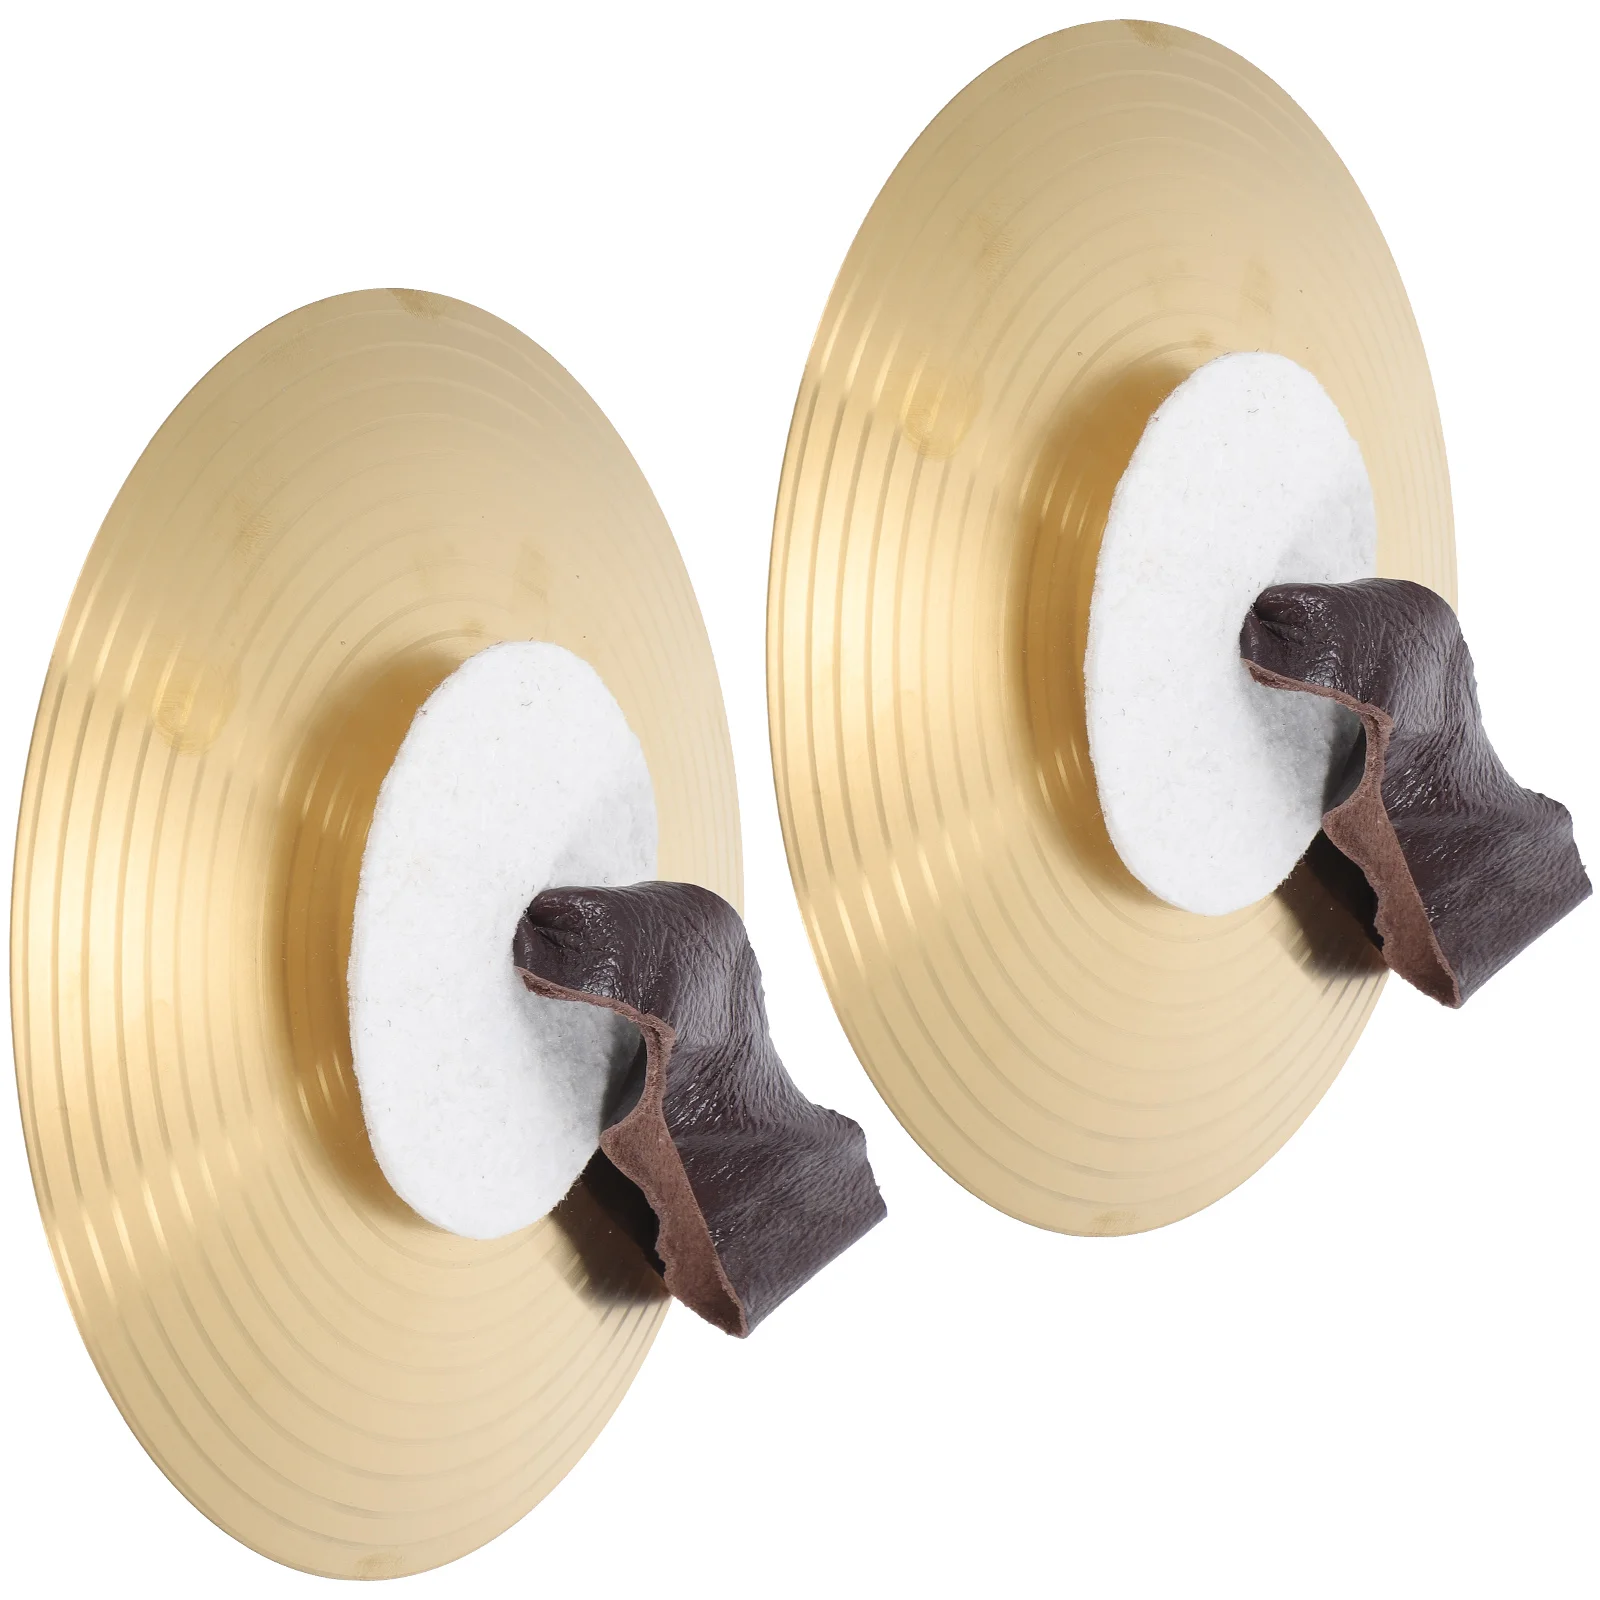 

1 Pair of Small Alloy Hand Cymbals Performance Band Percussion Musical Instrument